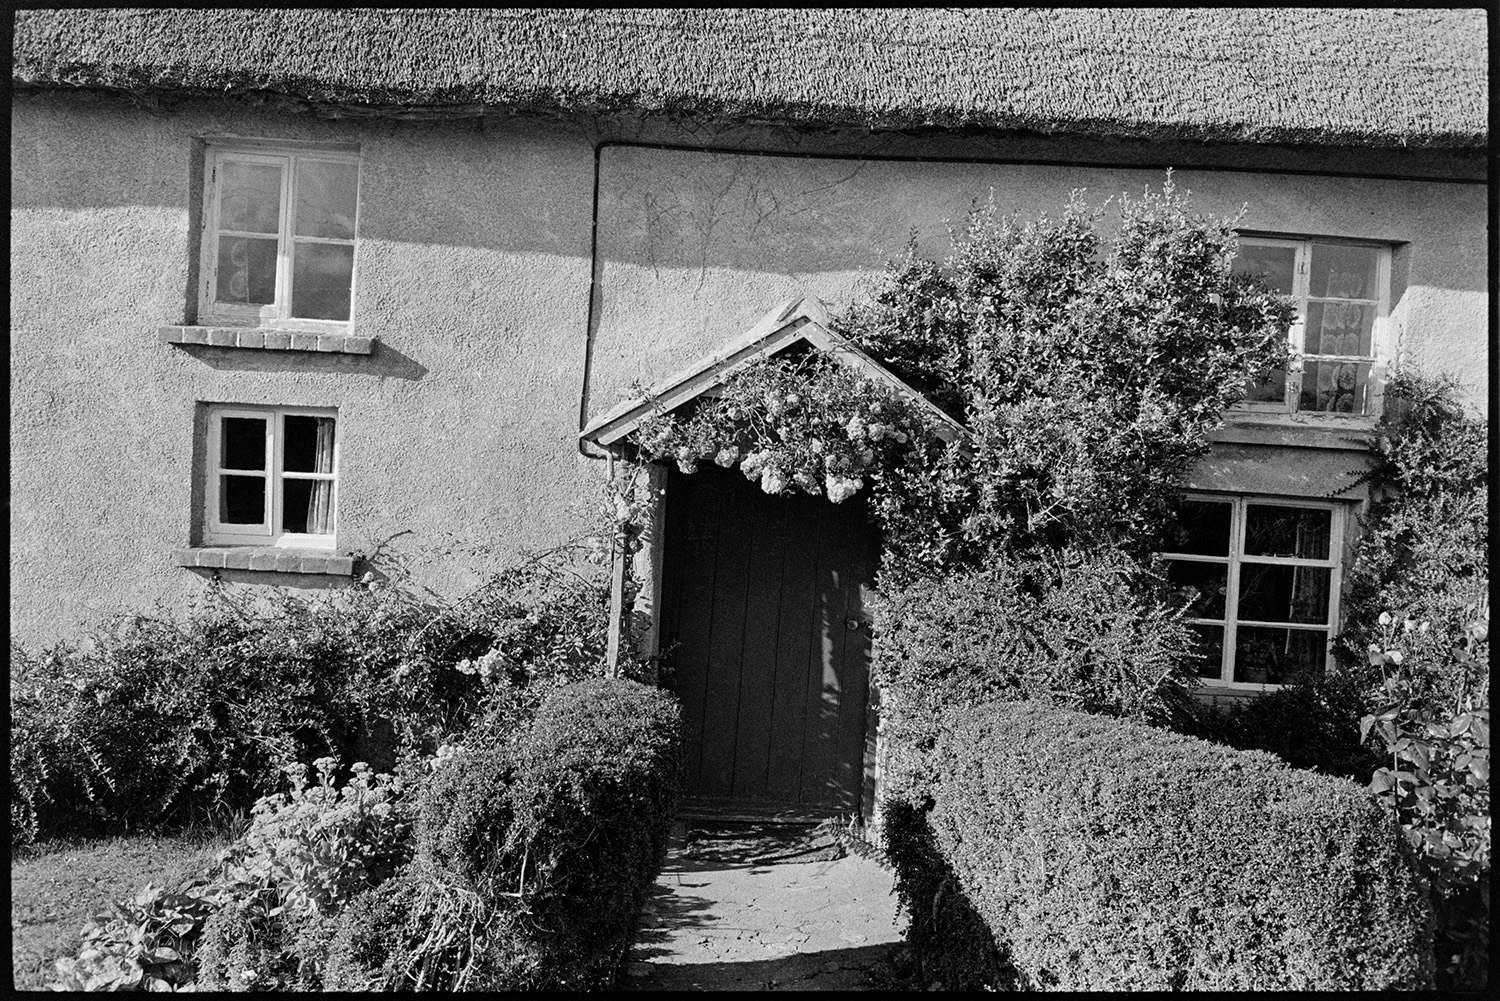 Front of thatched cottage with porch. 
[The front of Paradise Cottage at Iddesleigh. The roof is thatched and a flower is growing around the porch.]